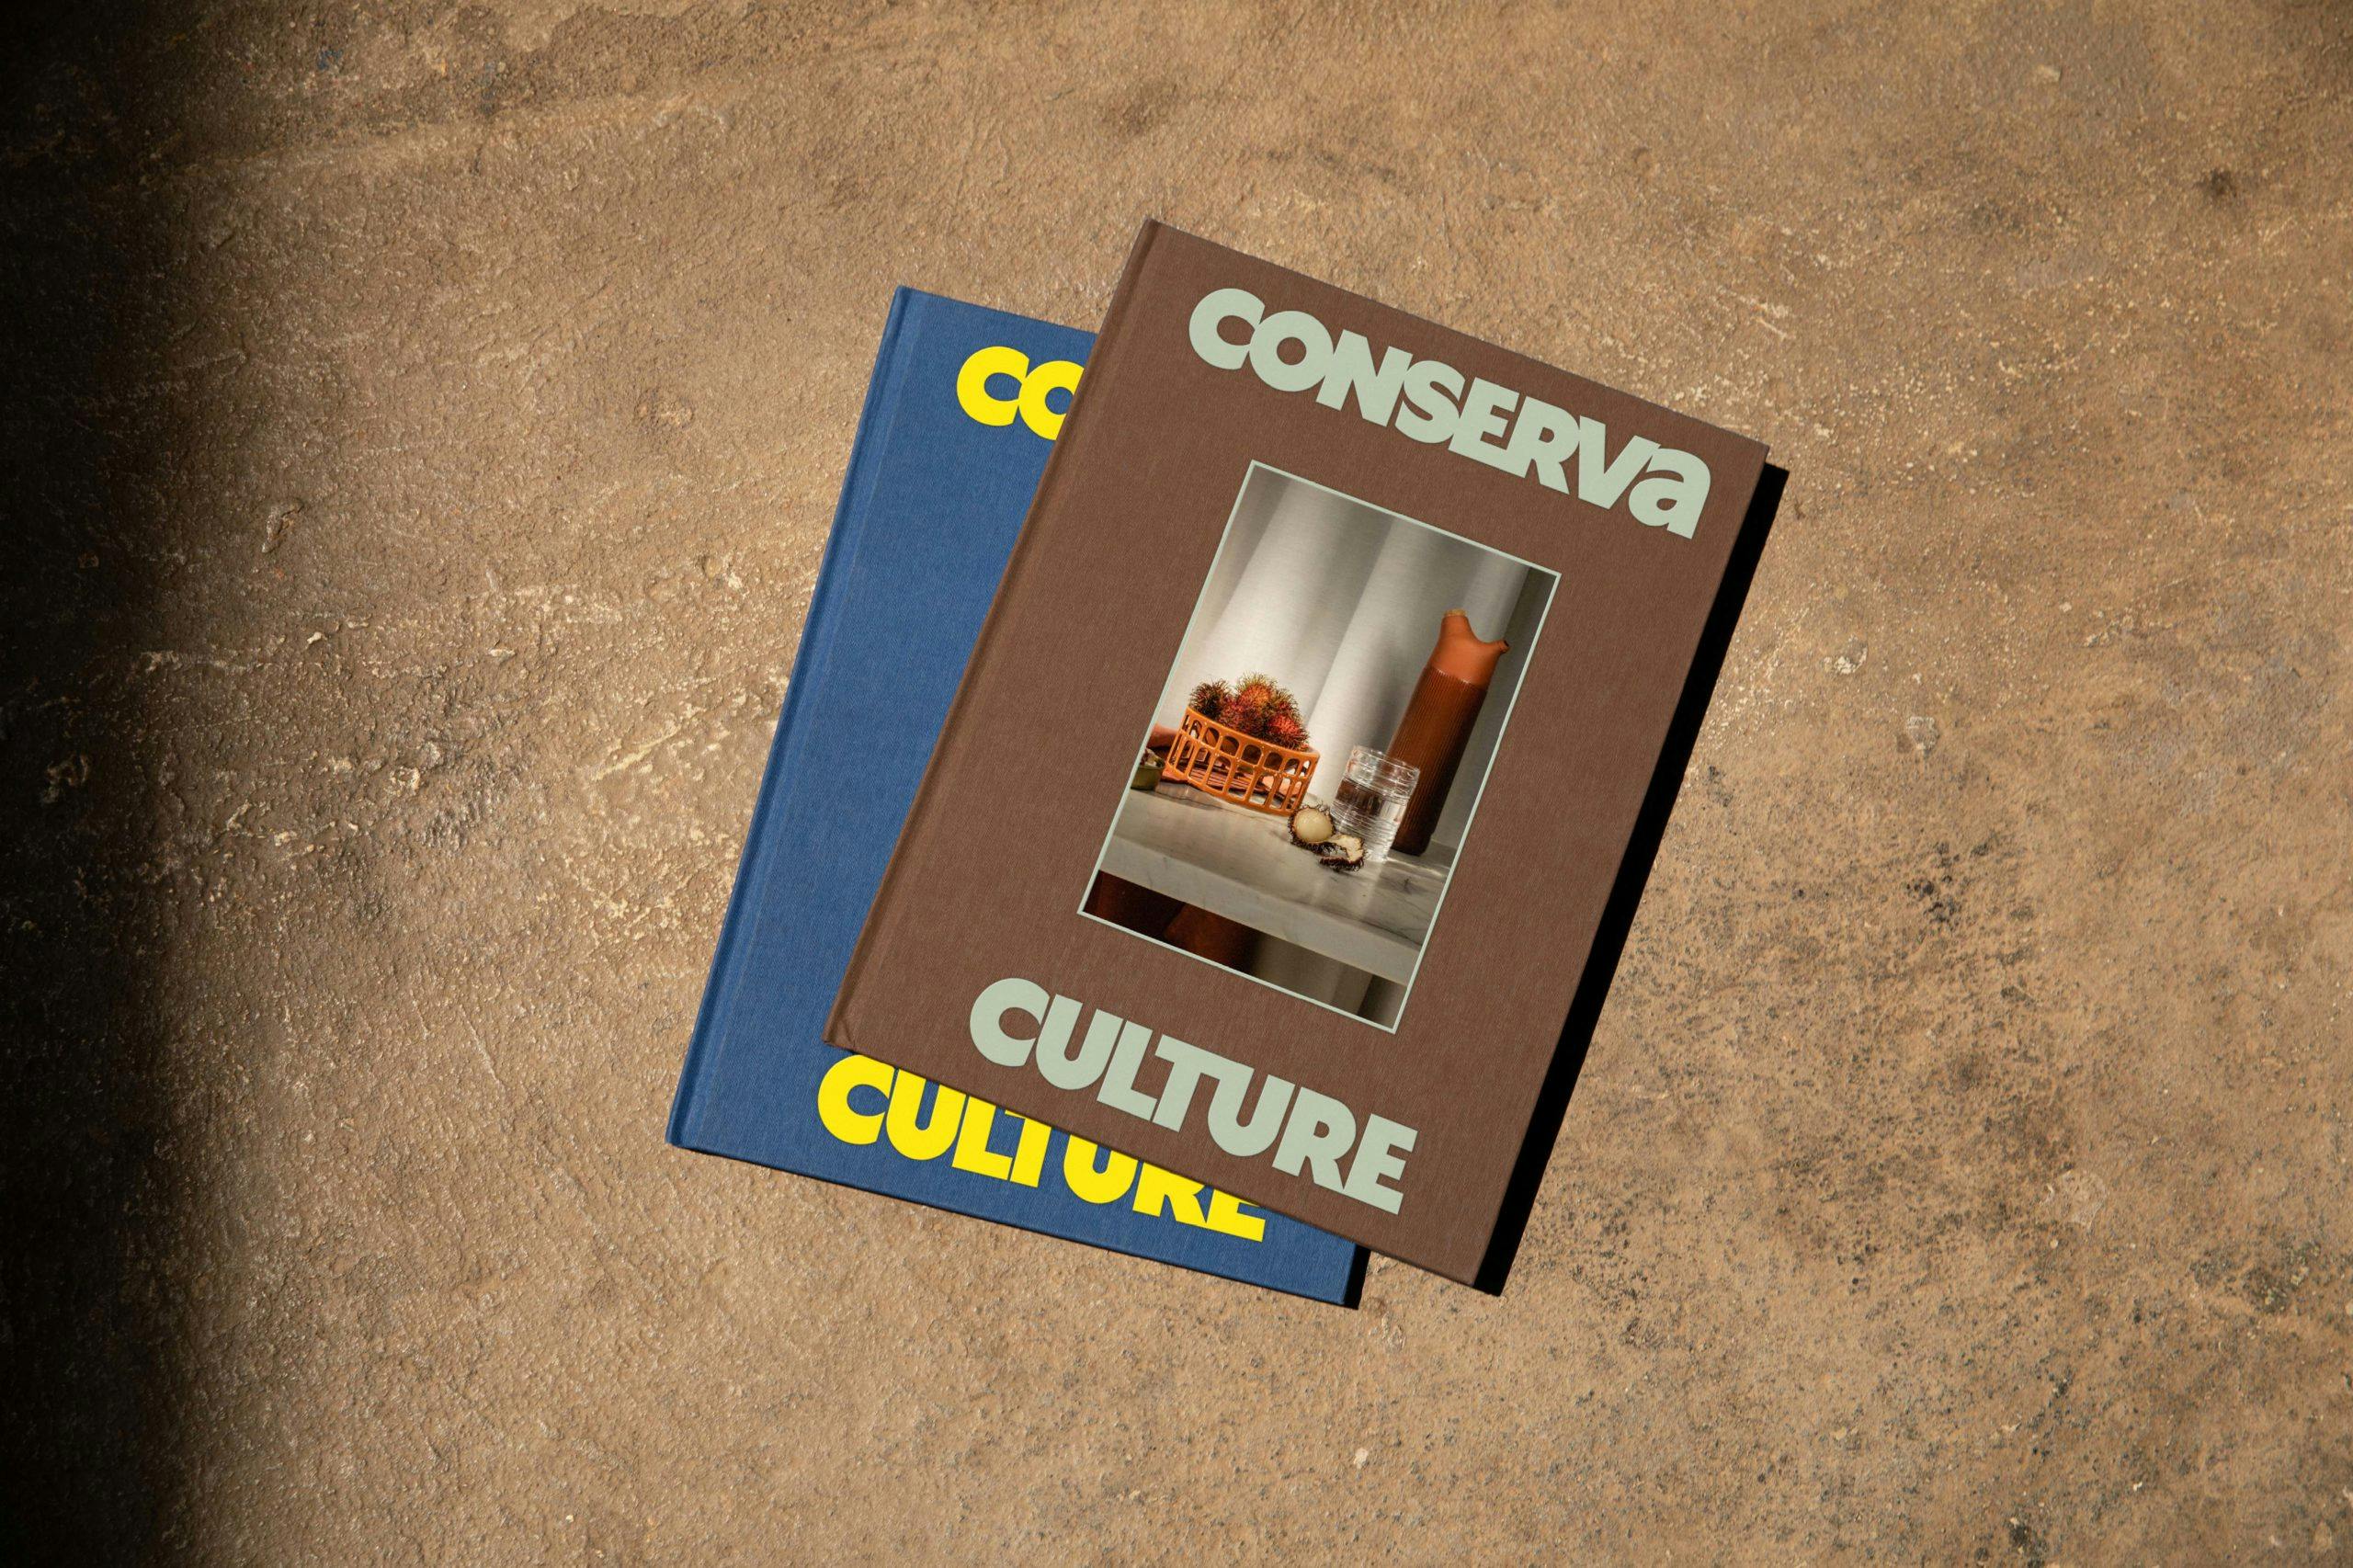 Two Conserva journals on a concrete floor